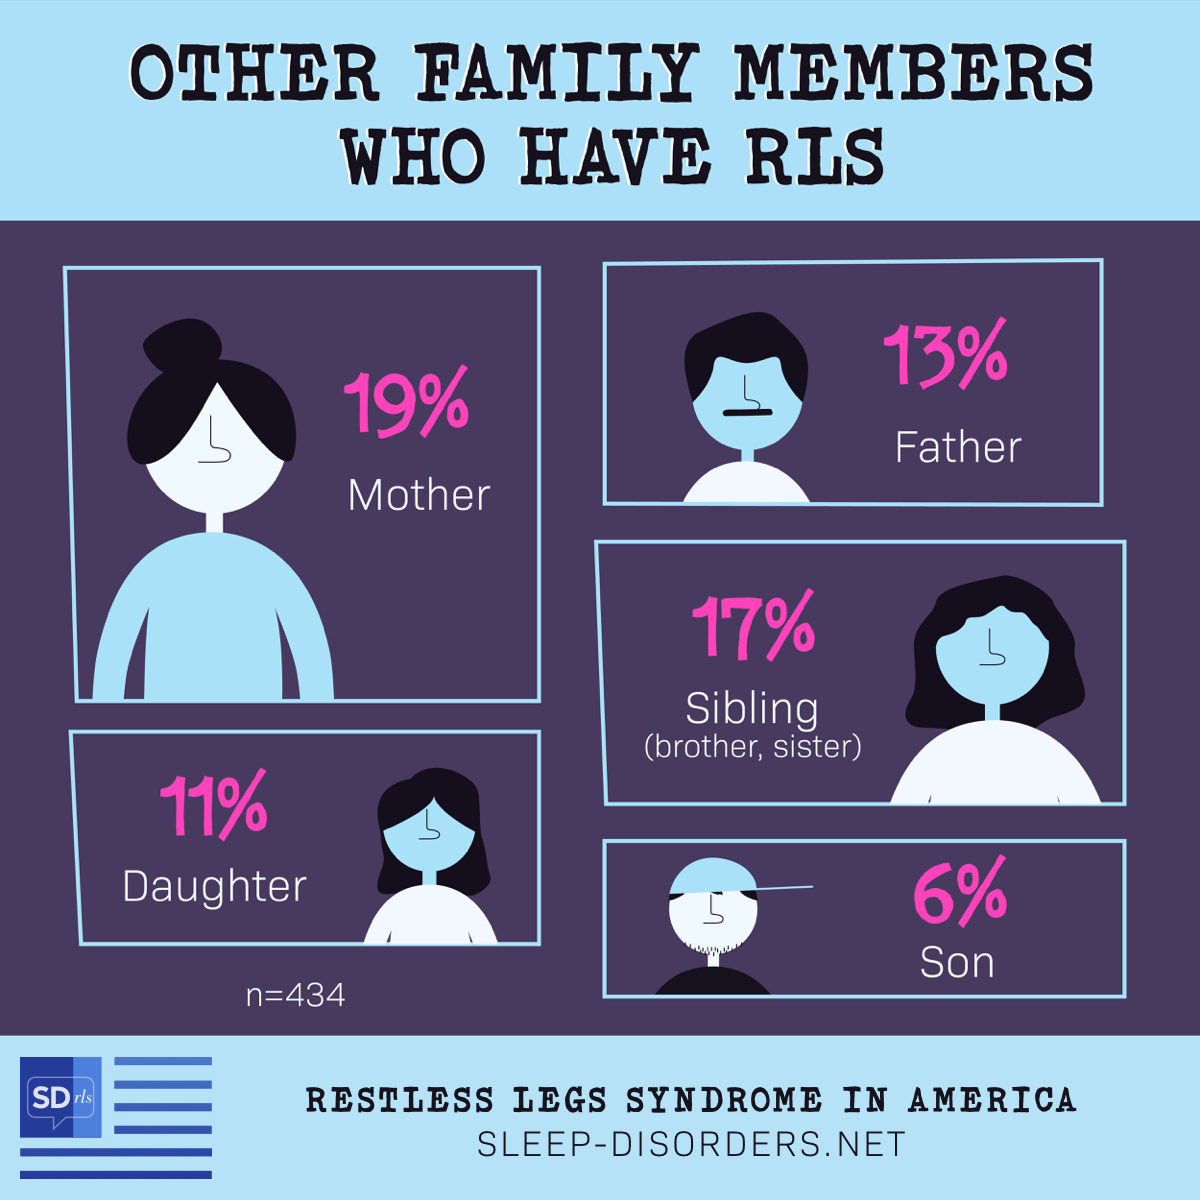 Other family members who have RLS include mother (19%), sibling (17%), father (13%), daughter (11%) and son (6%).